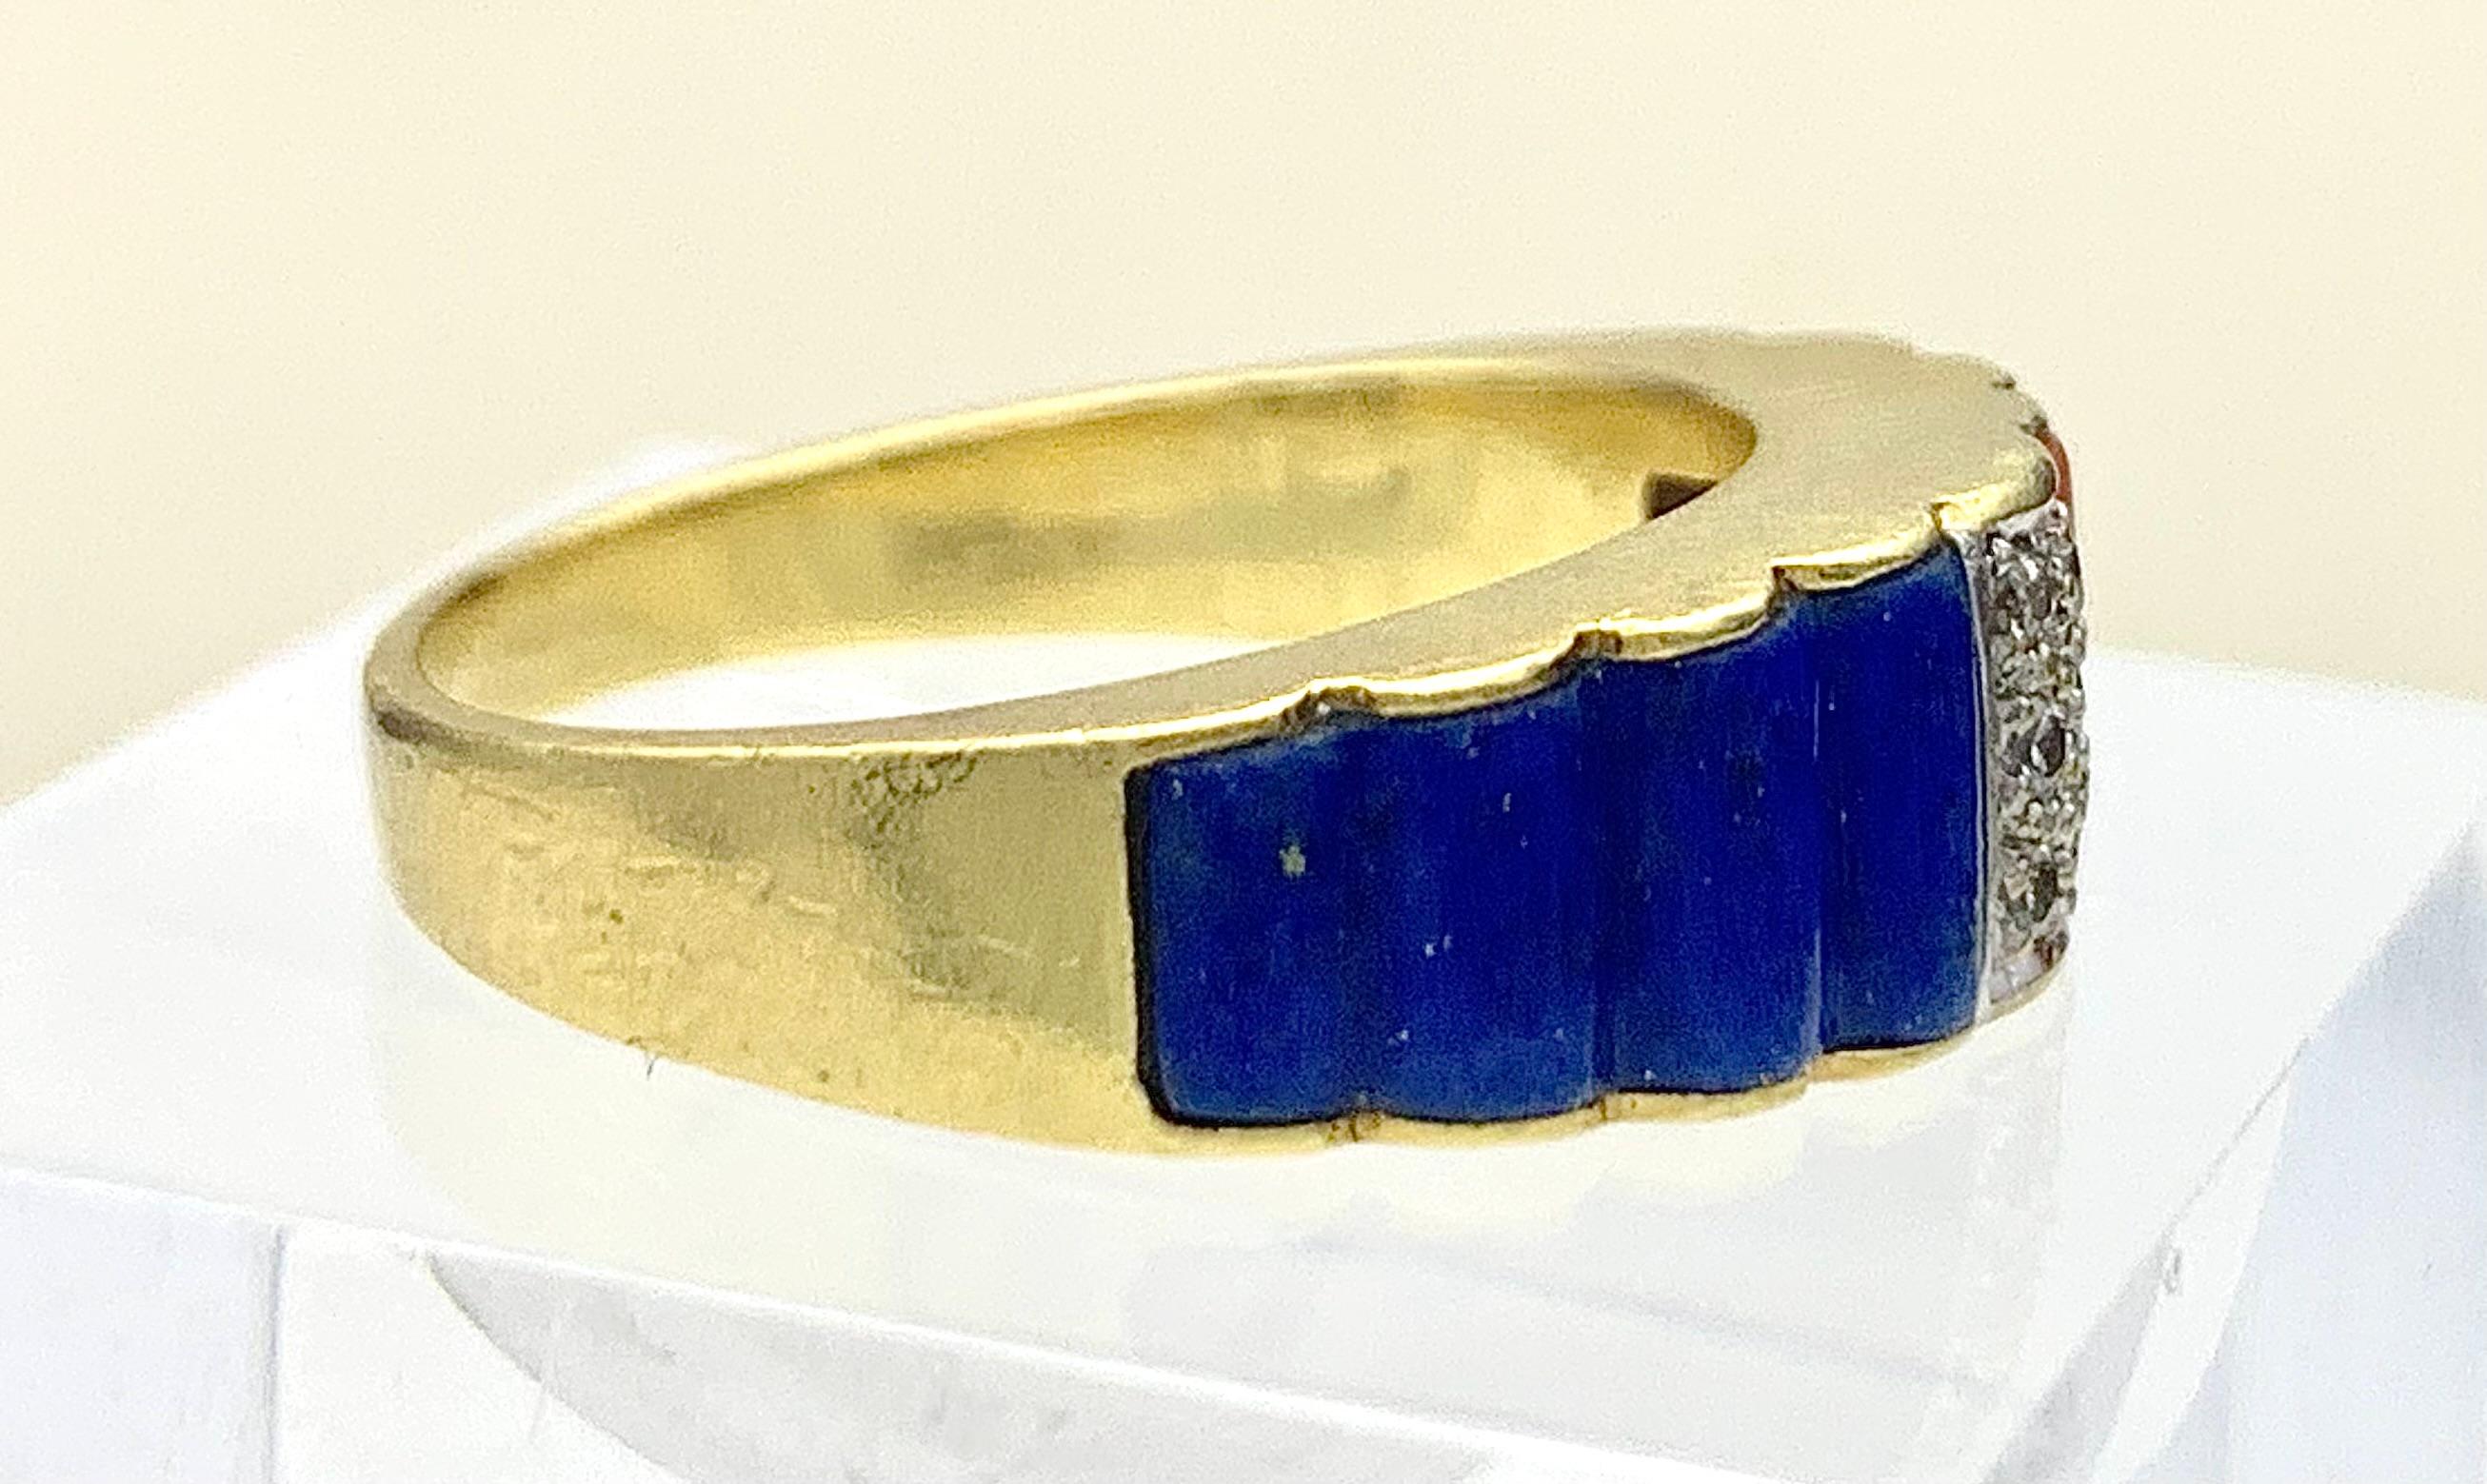 This elegant slightly domed band ring has been made out of 18 karat gold in 1970 ca. The outer borders of the ring head are designed as wavy sheets of gold that hold a piece of intense blue carved lapis lazuli on one side and a piece of deep orange